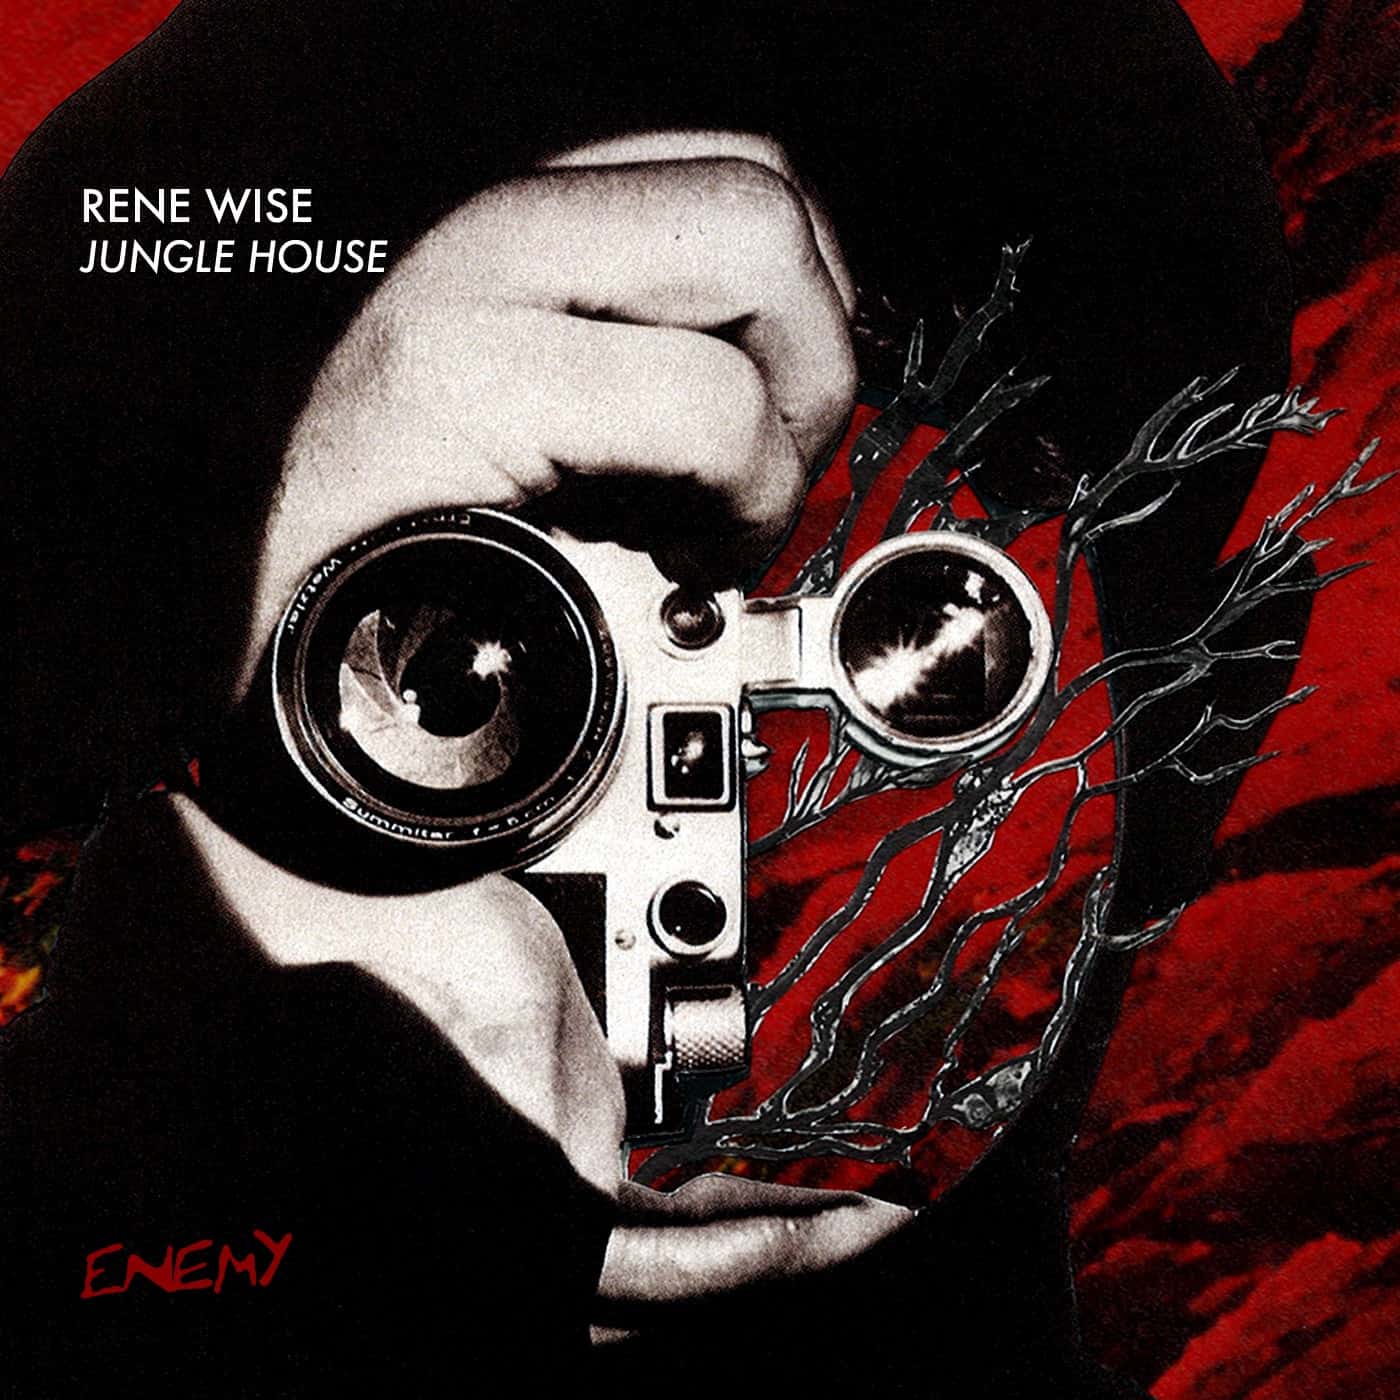 image cover: Rene Wise - Jungle House / ENEMY038